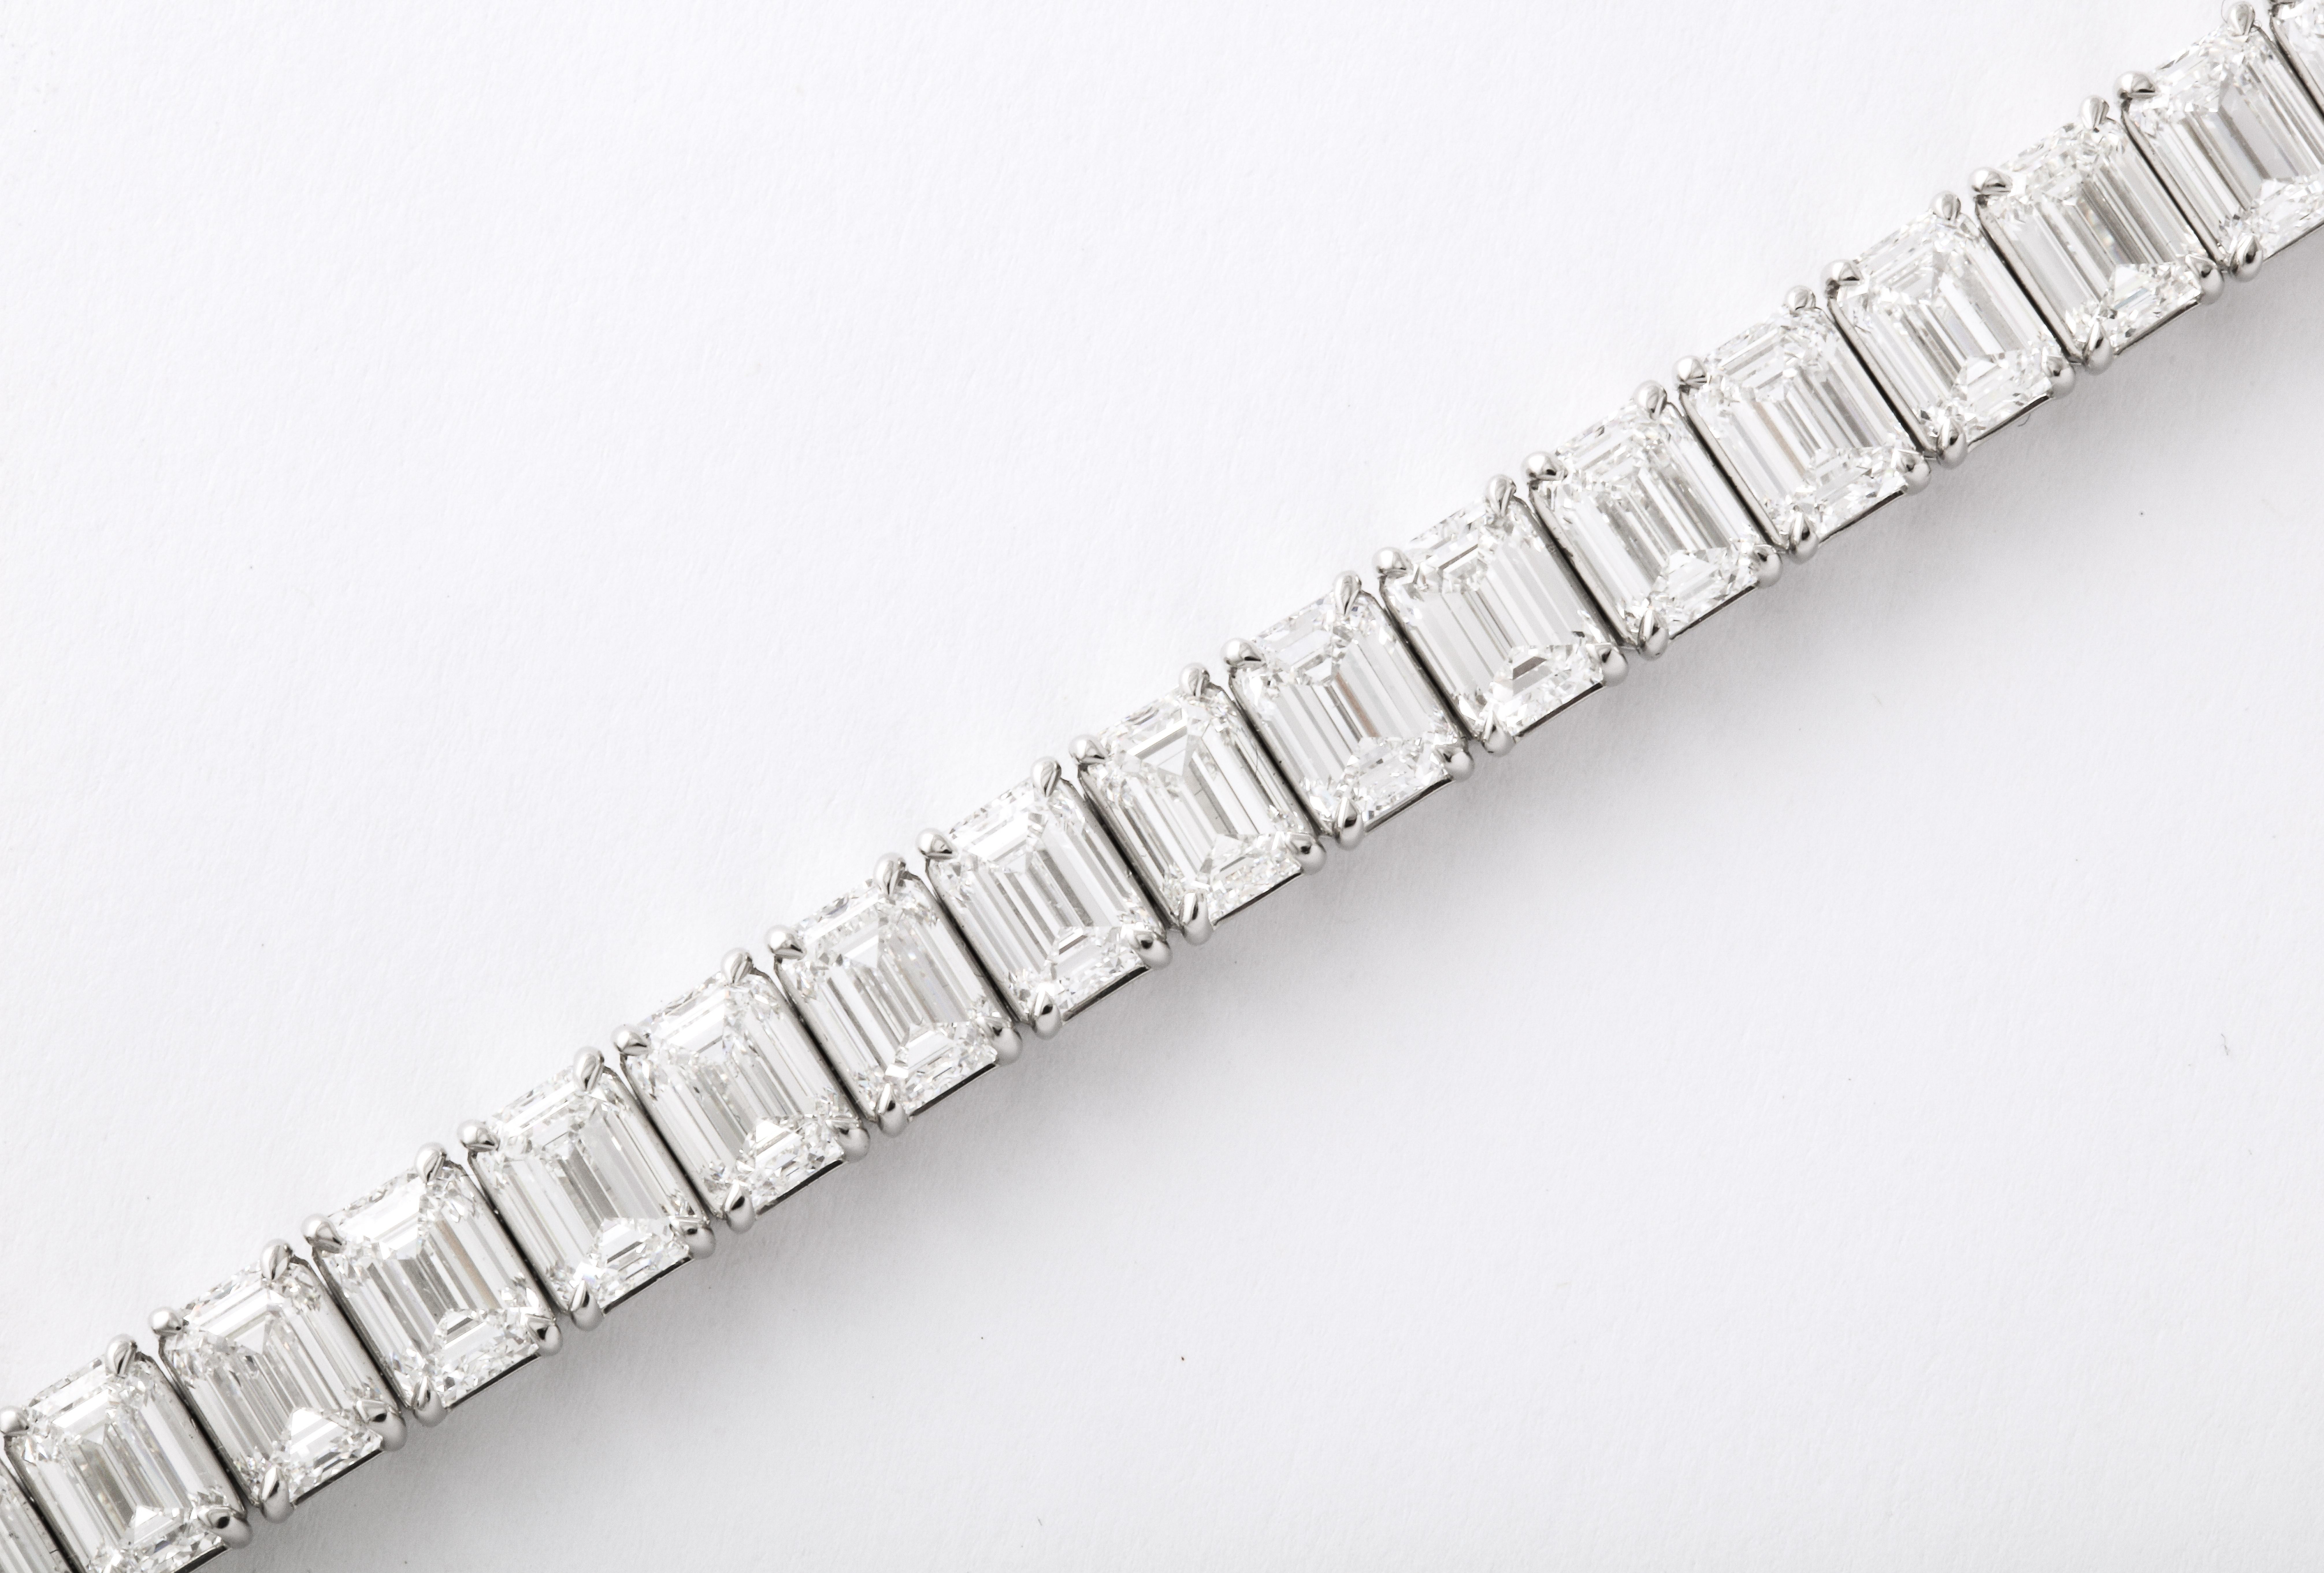 
A SENSATIONAL bracelet!

A beautiful layout of GIA Certified diamonds, all with ideal measurements - 37 total Emerald cut diamonds weighing 26.81 carats!

GIA Certified DEF color VS+ clarity diamonds set in a custom platinum mounting. 

The